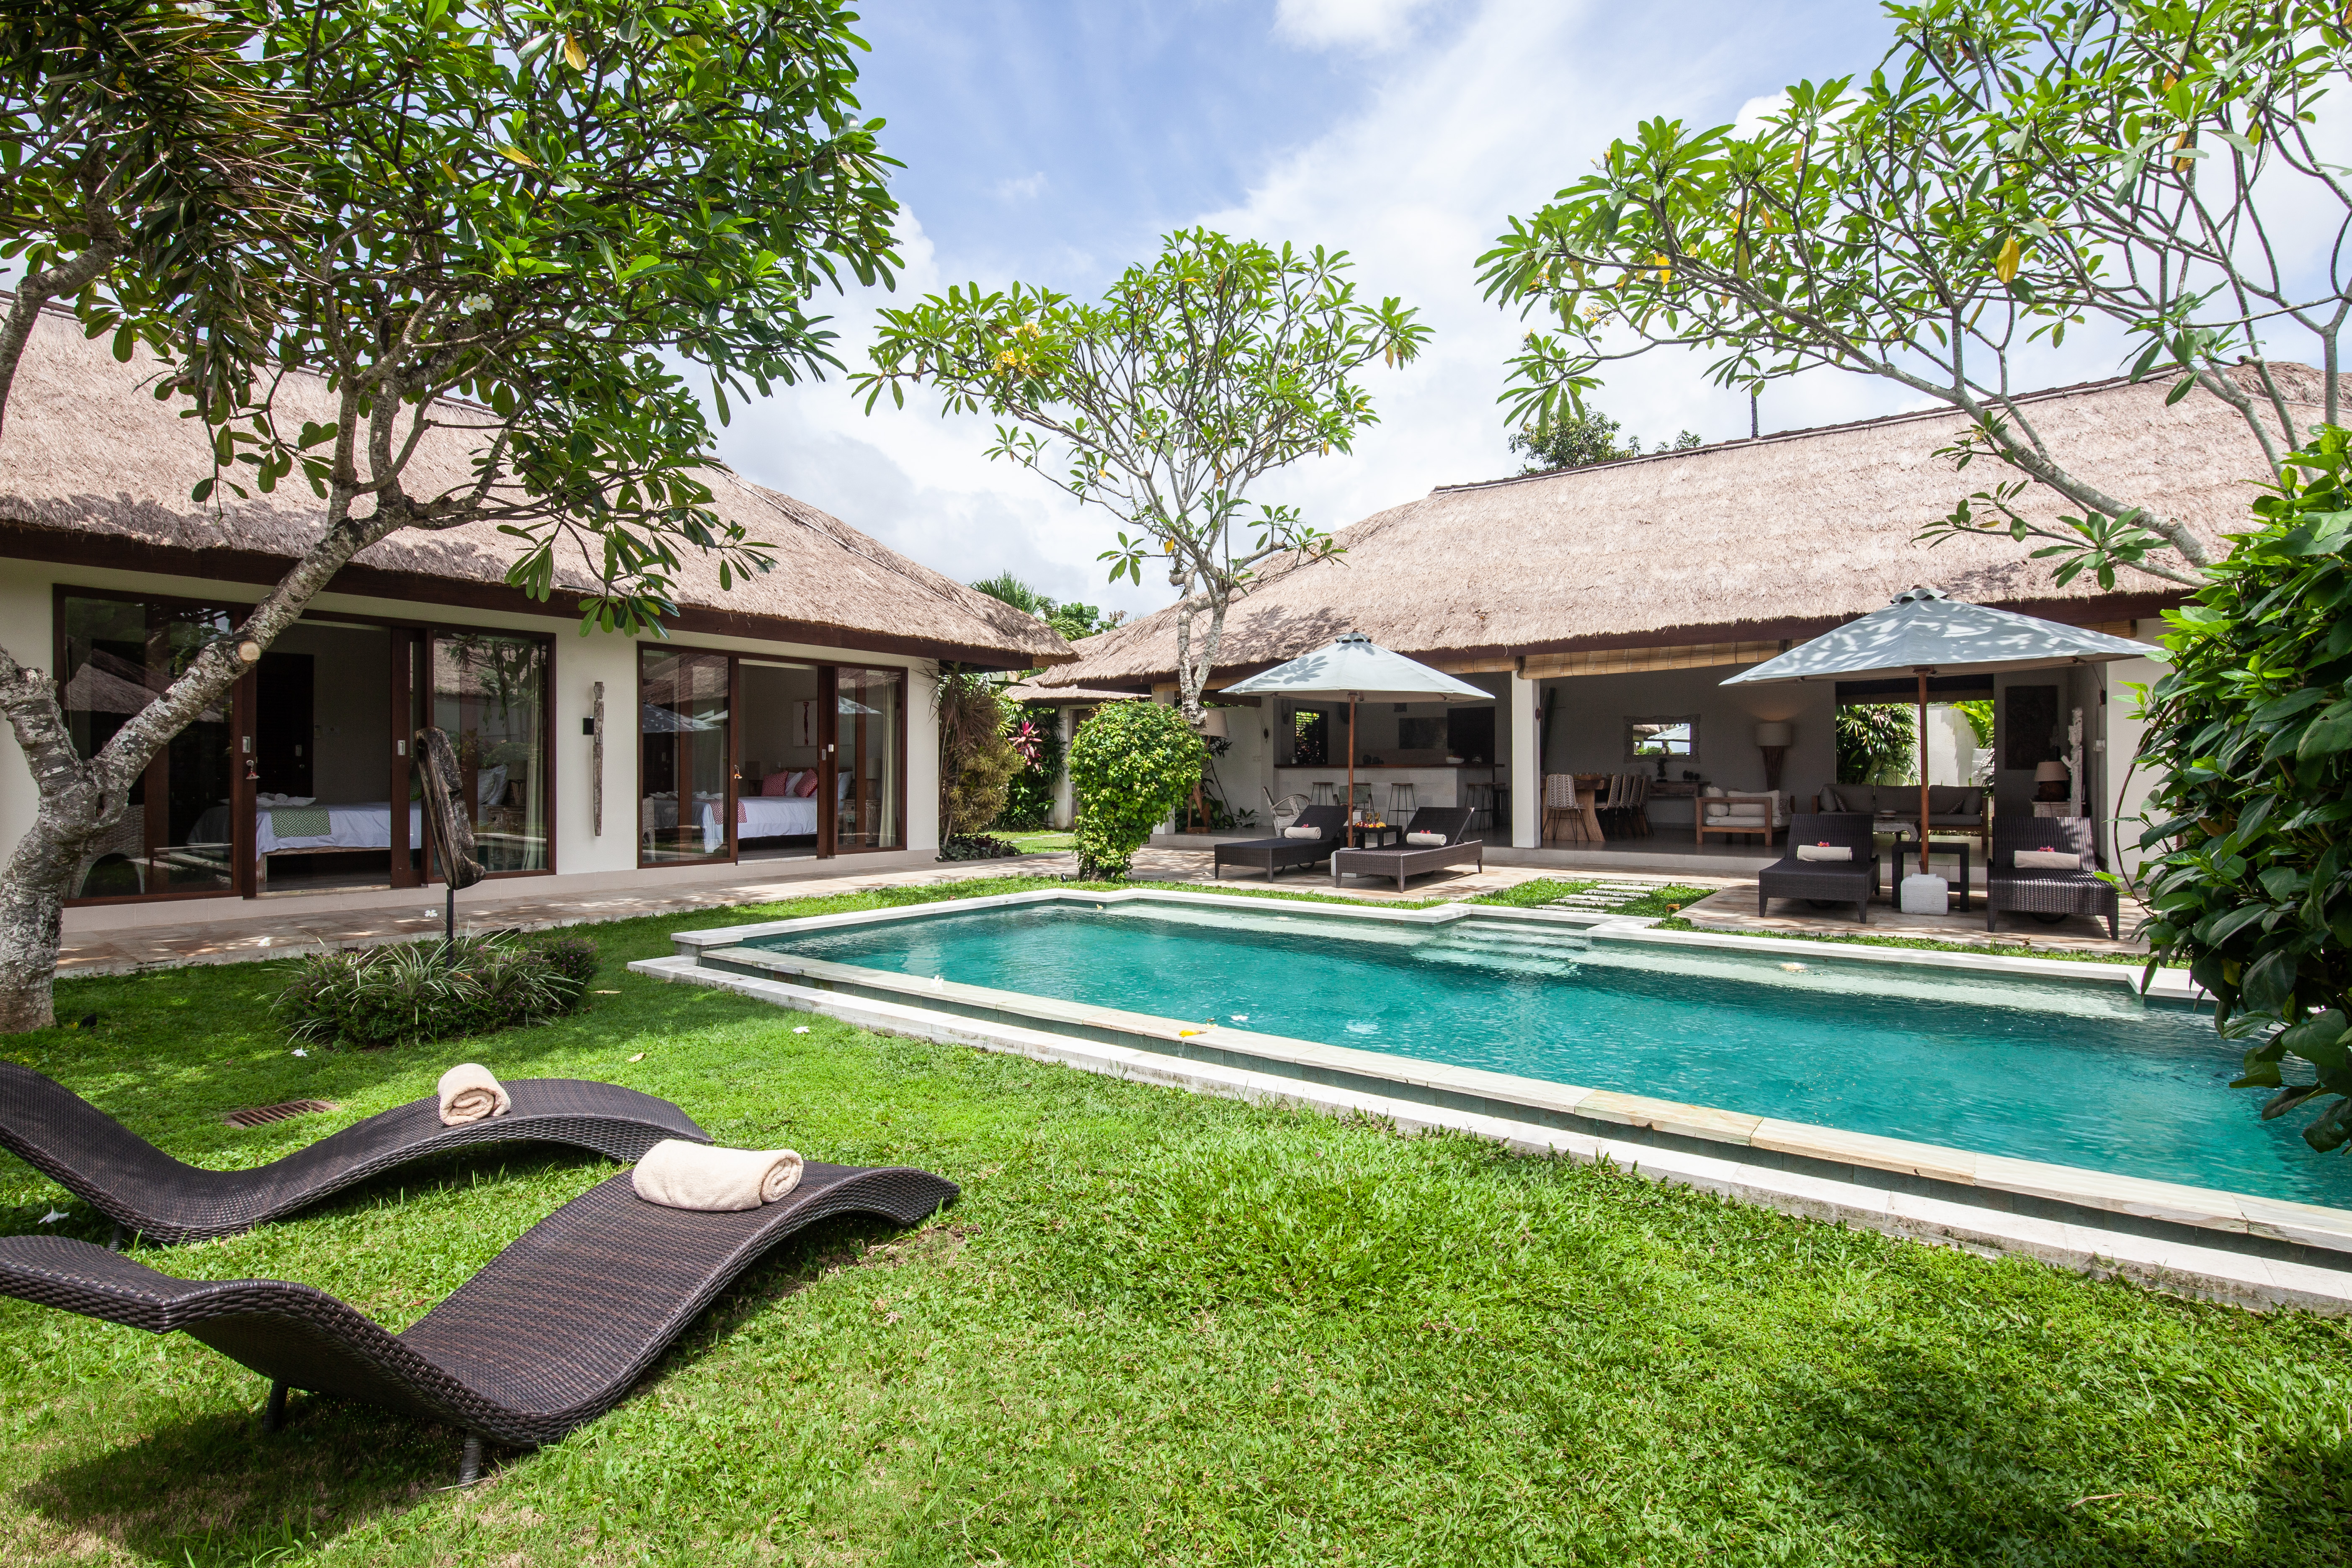 Sumptuous 4 bedrooms villa in an authentic setting - Villas for Rent in  Canggu, Bali, Indonesia - Airbnb